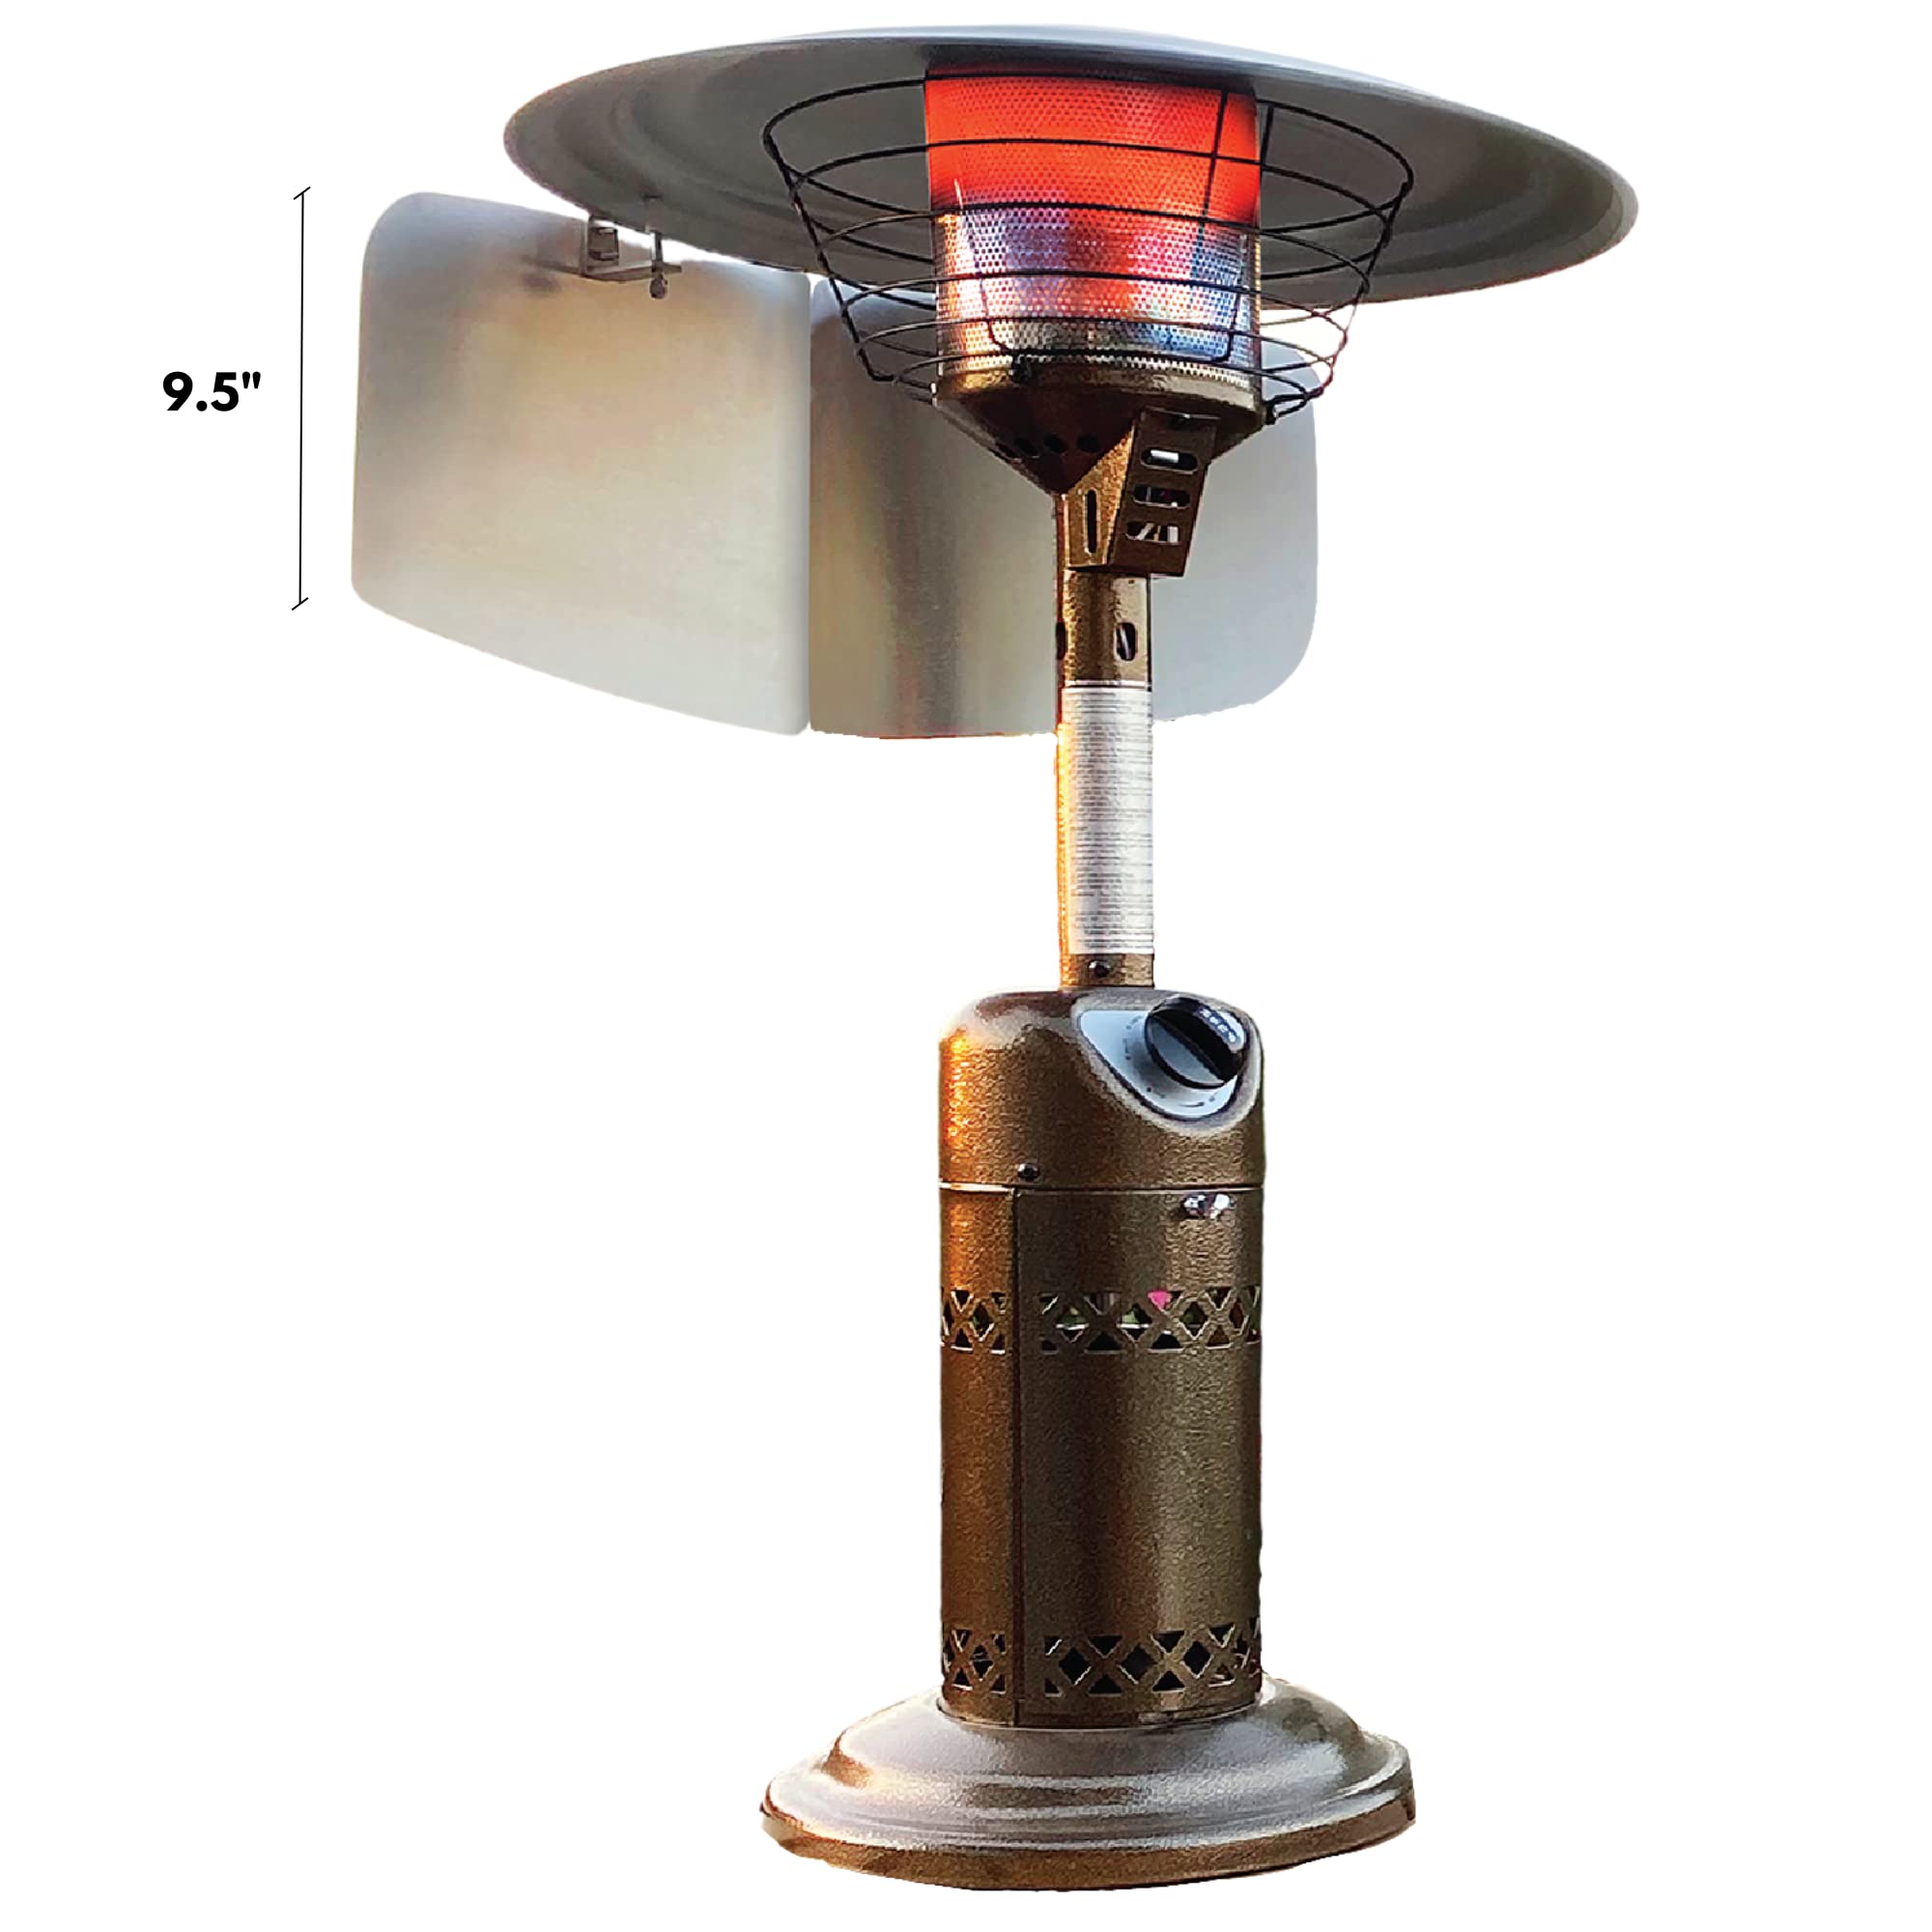 SWEET HEAT TABLE TOP - Foldable Heat Focusing Reflector - Universal-Fit for Small Patio Heaters - Light Weight, Aluminum,